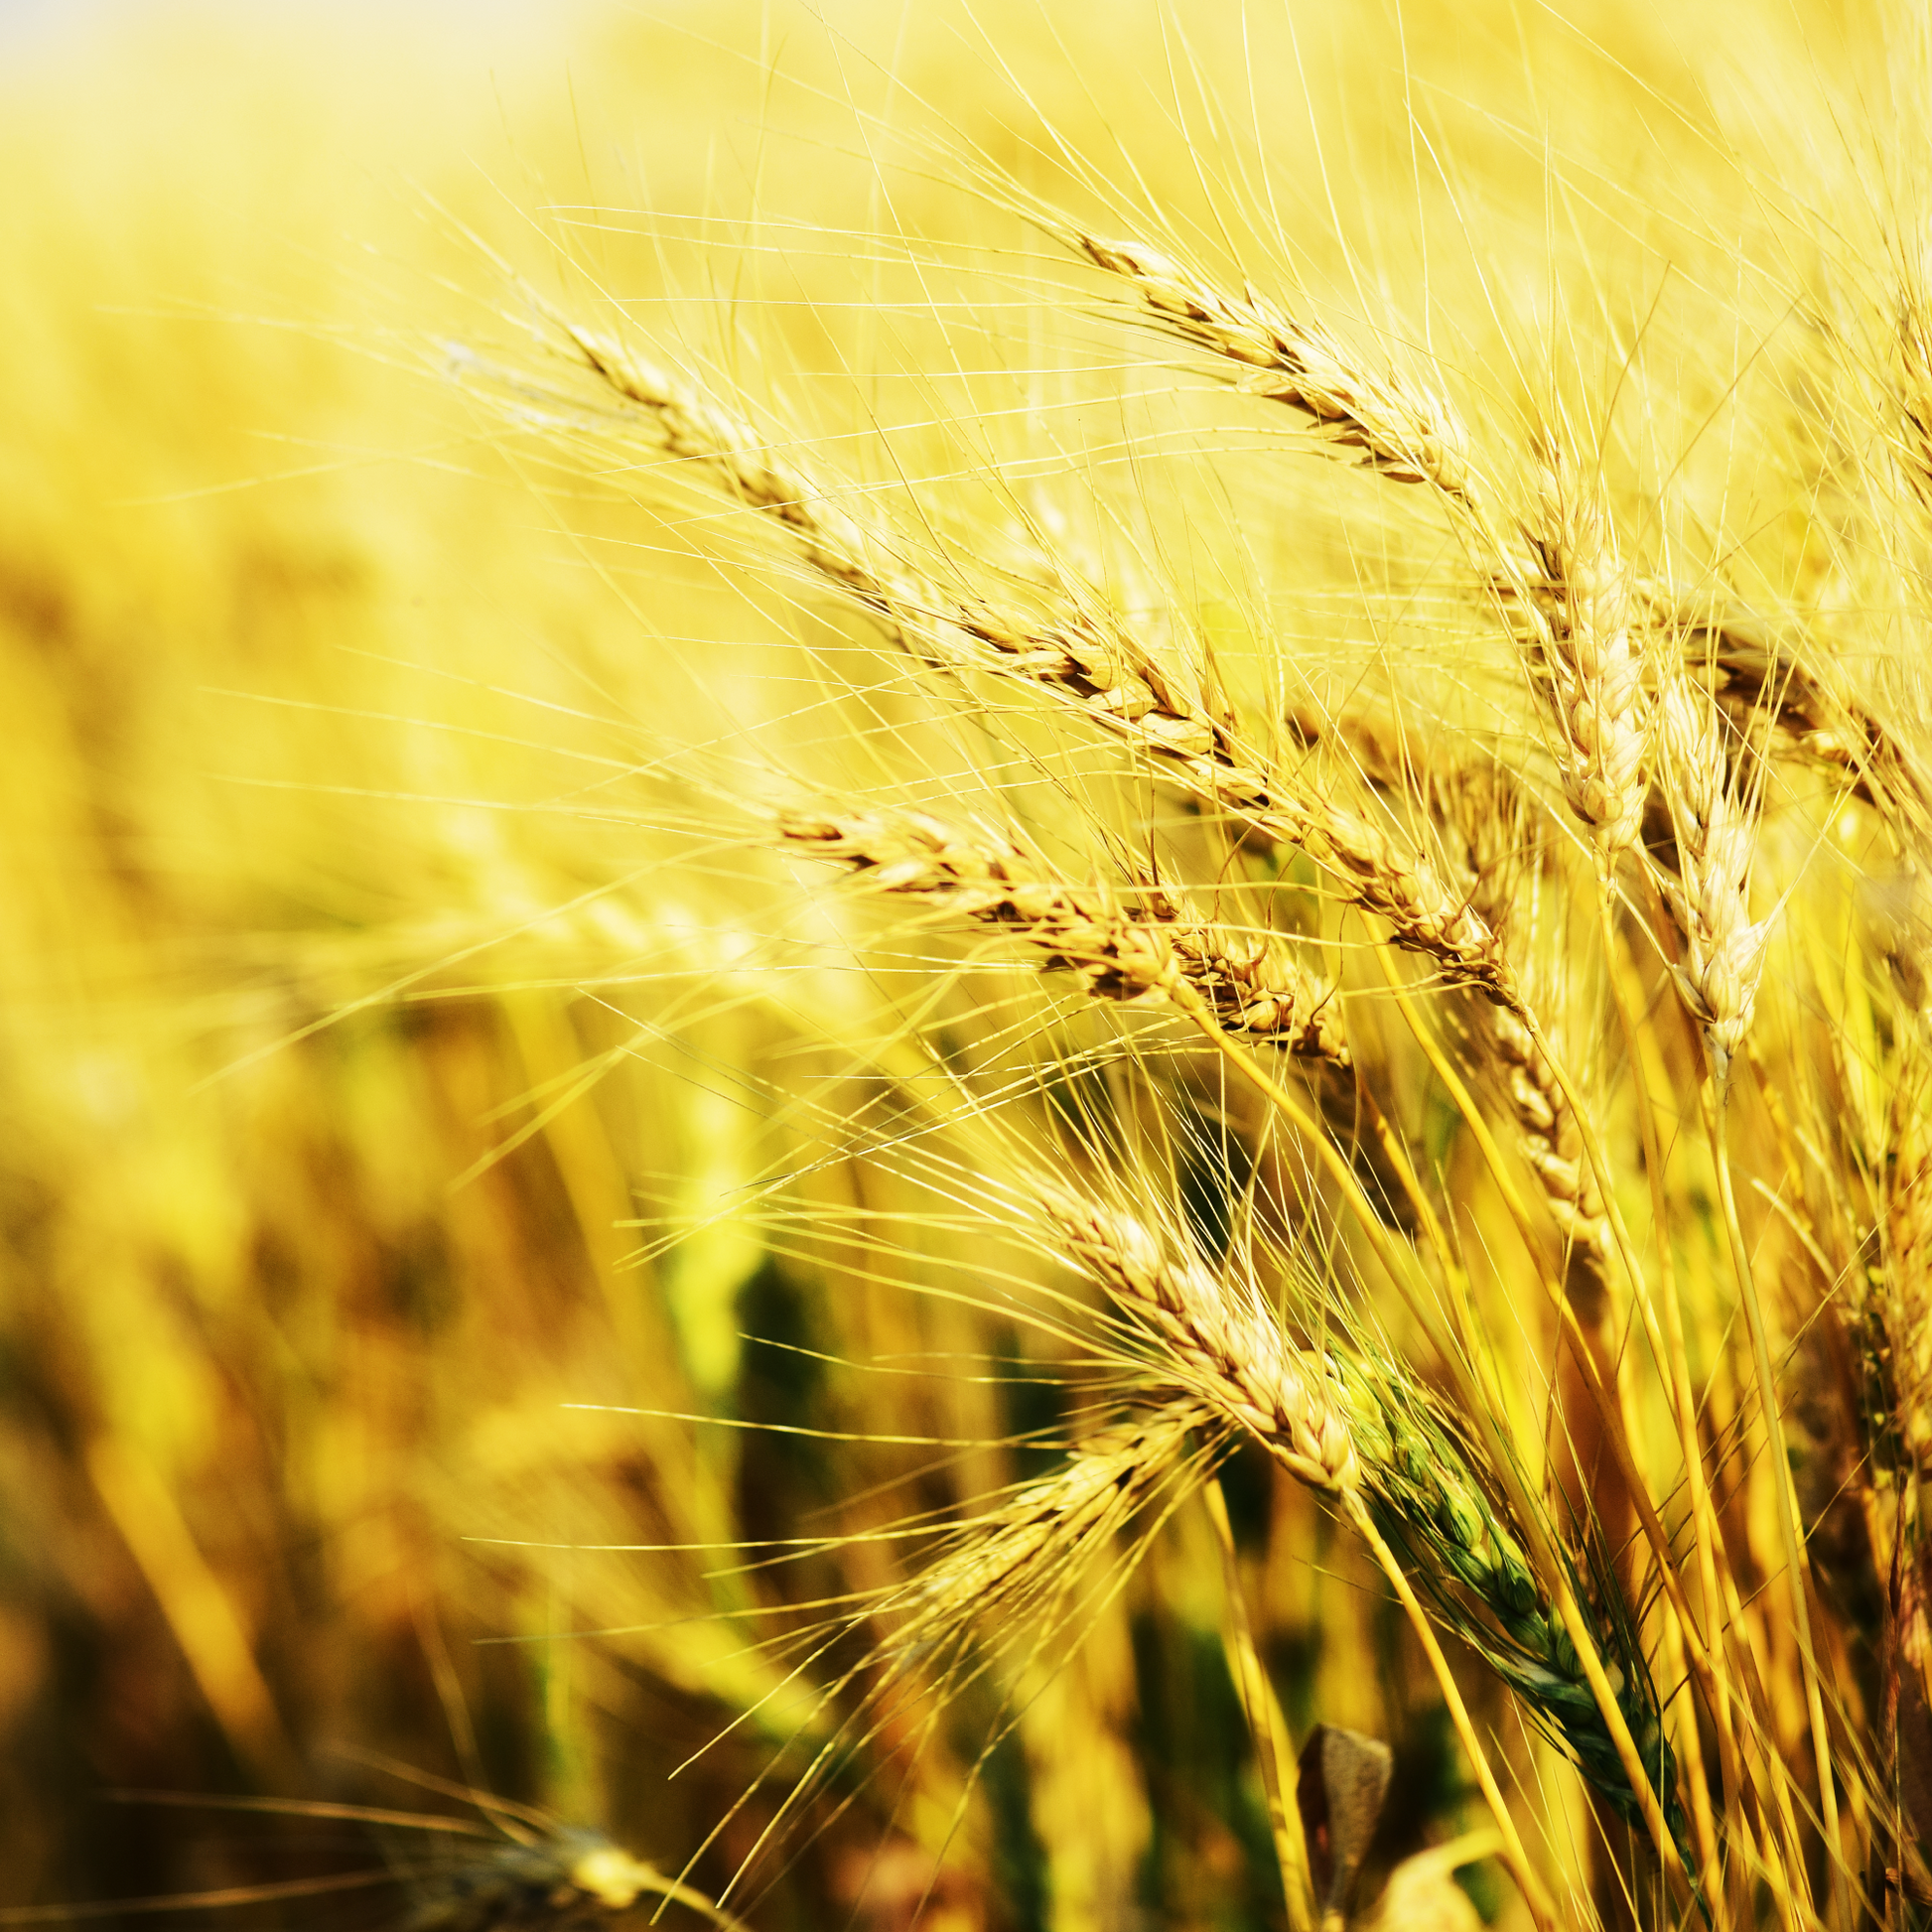 A bright, golden field of wheat.